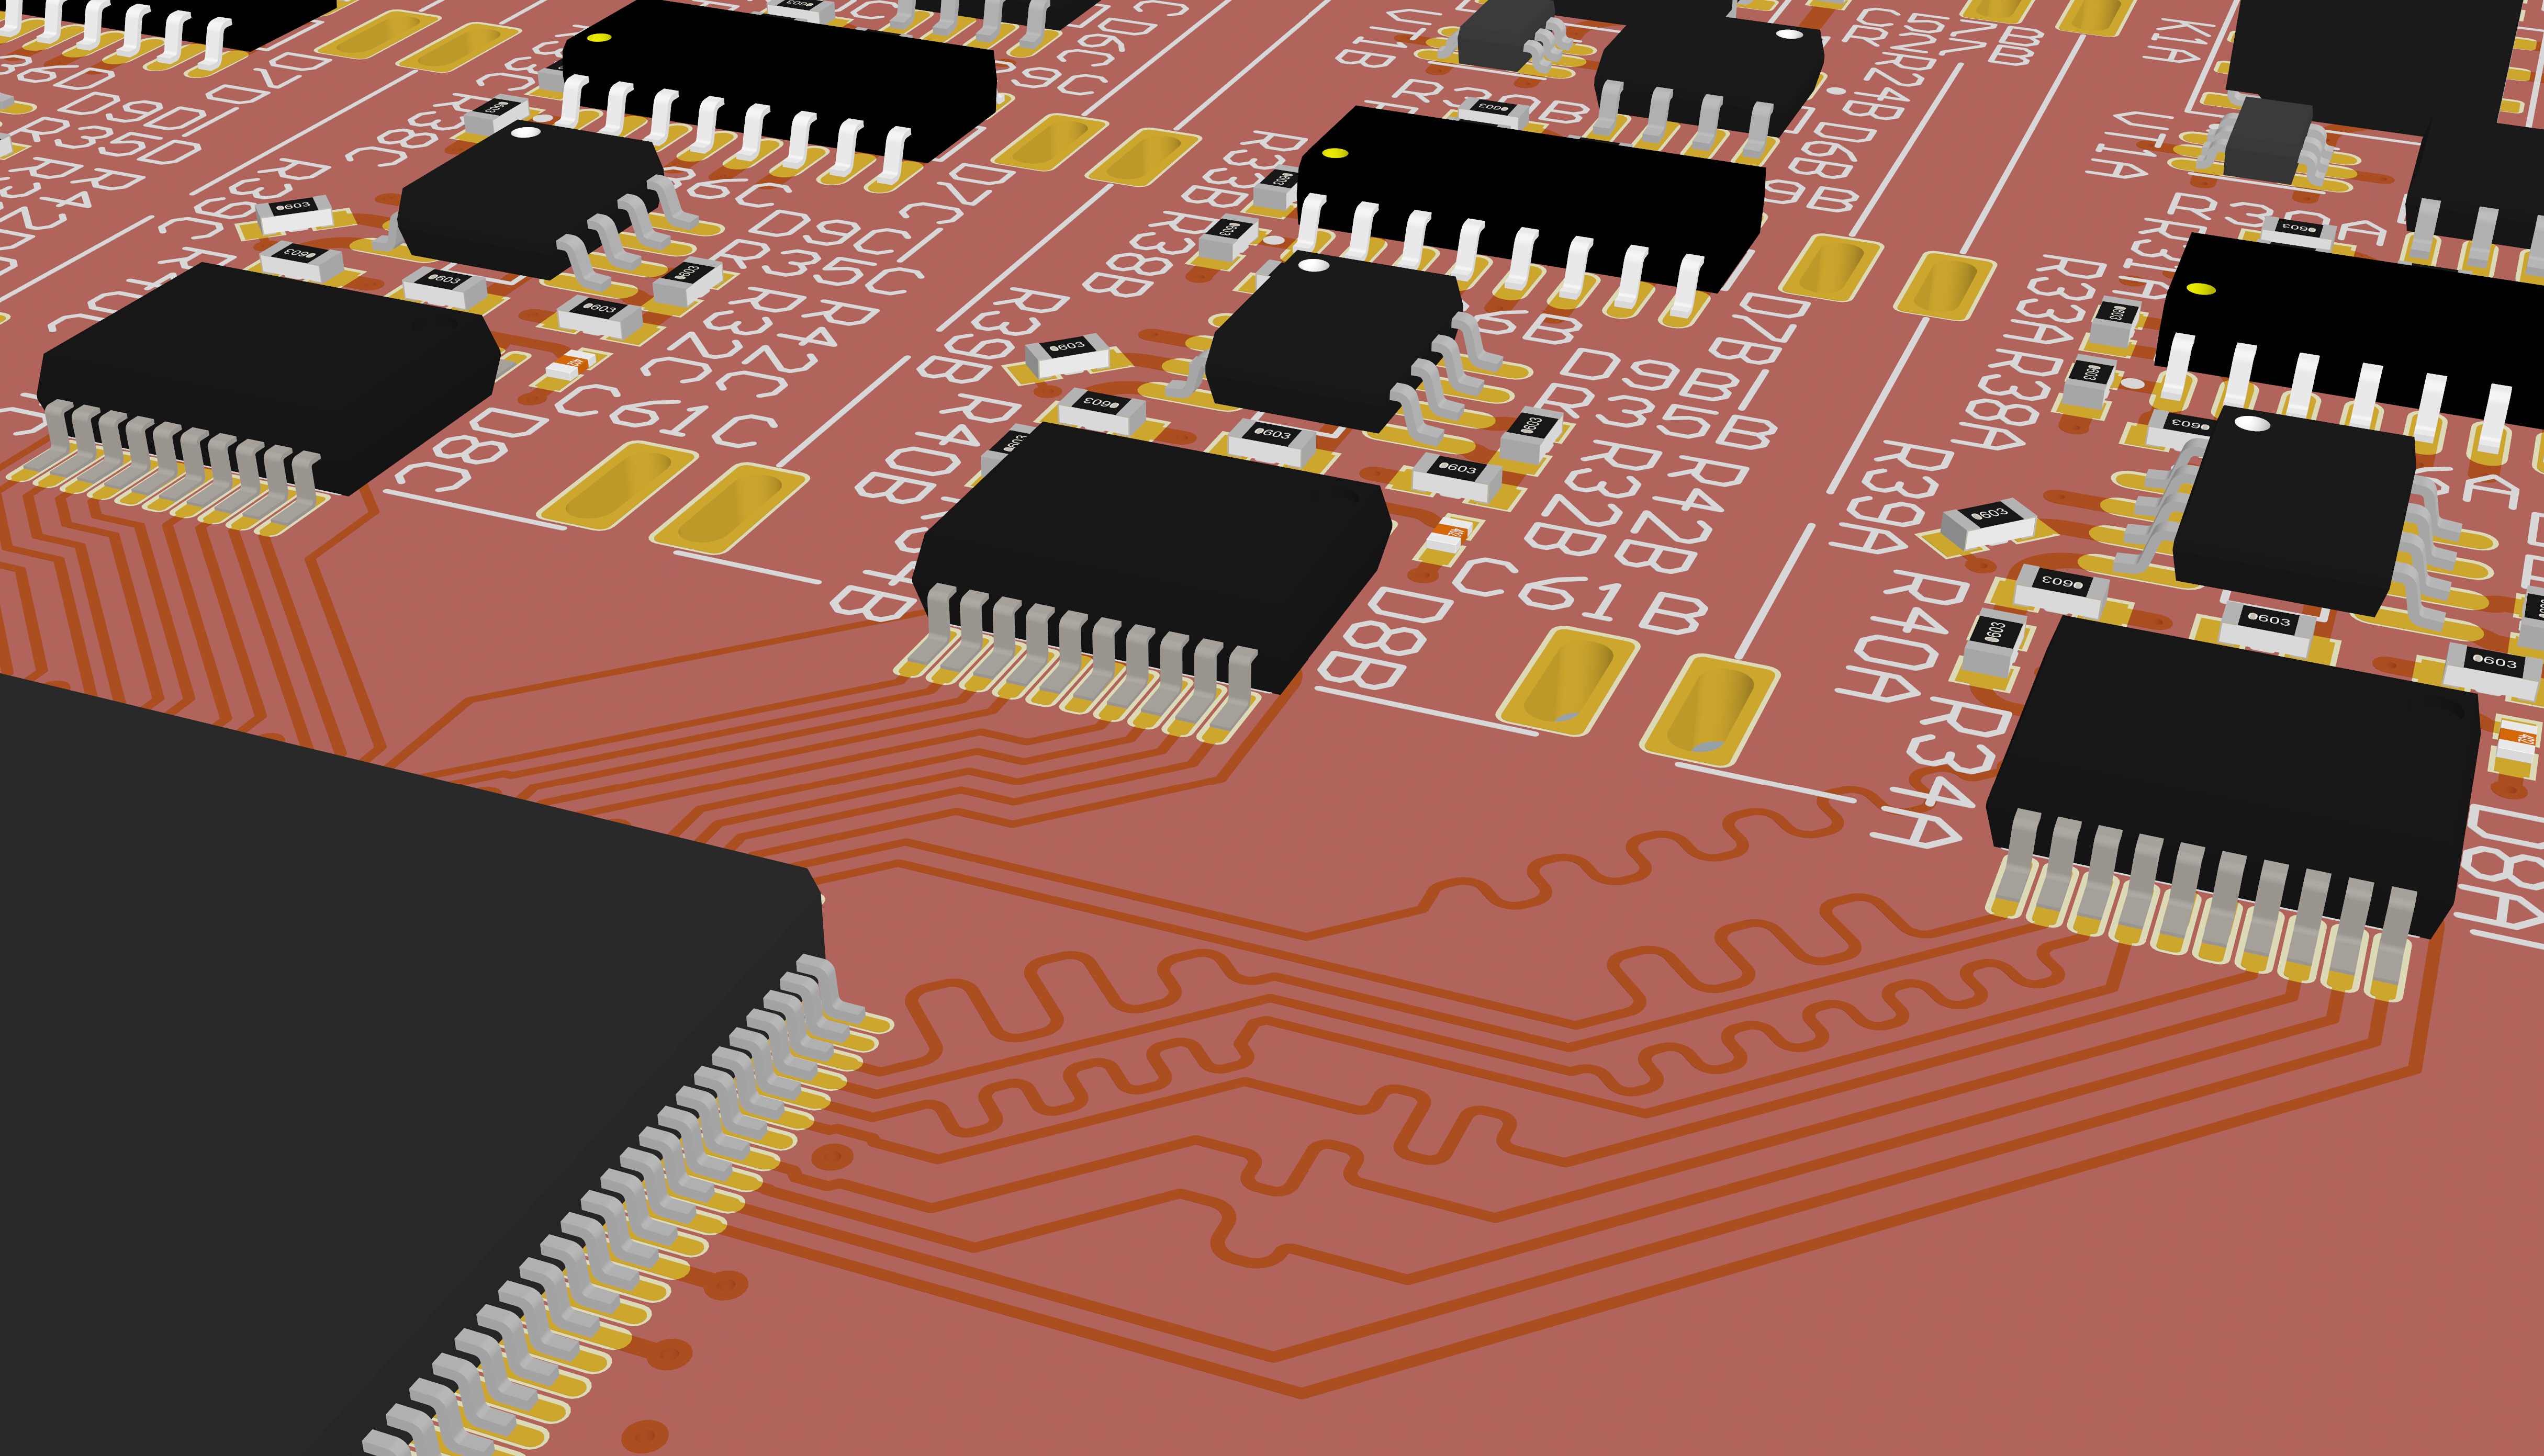 3D model of a PCB with multiple ICs.